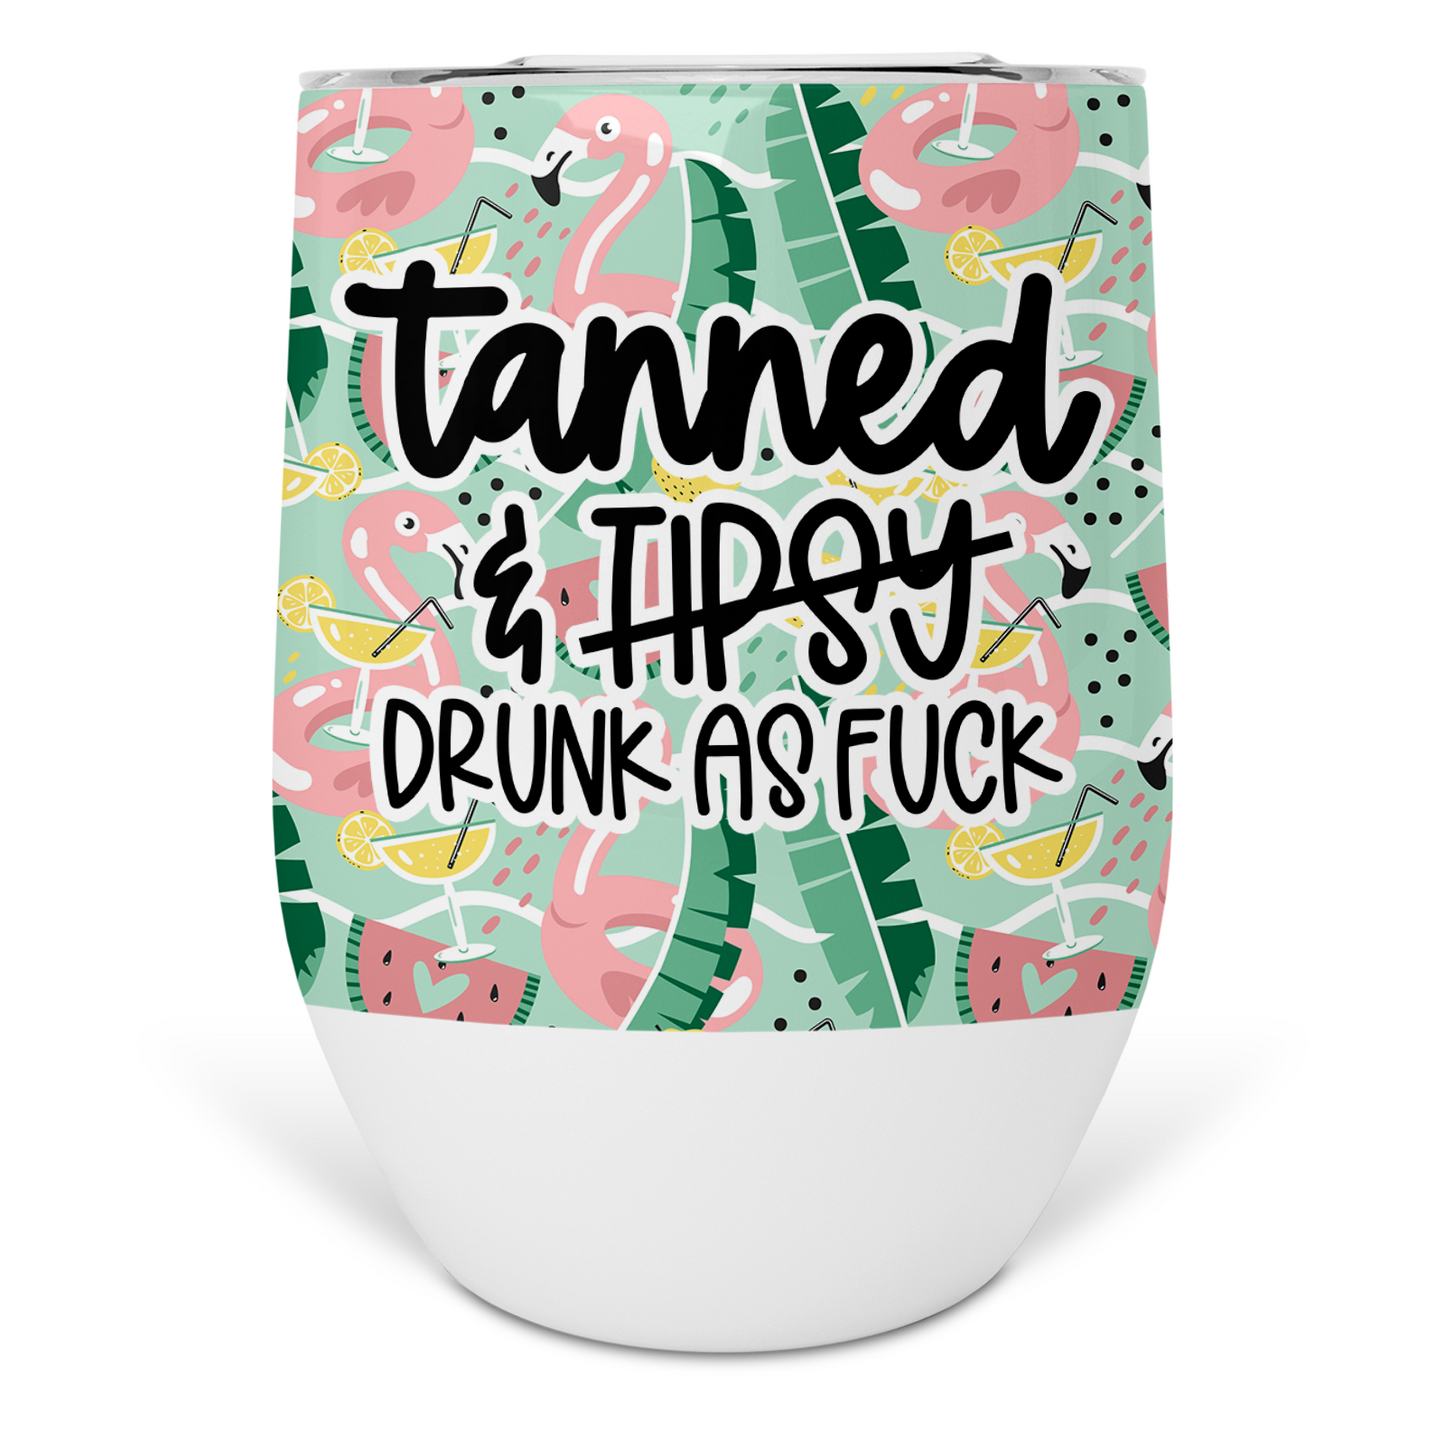 Tanned and Drunk As Fuck Wine Tumbler